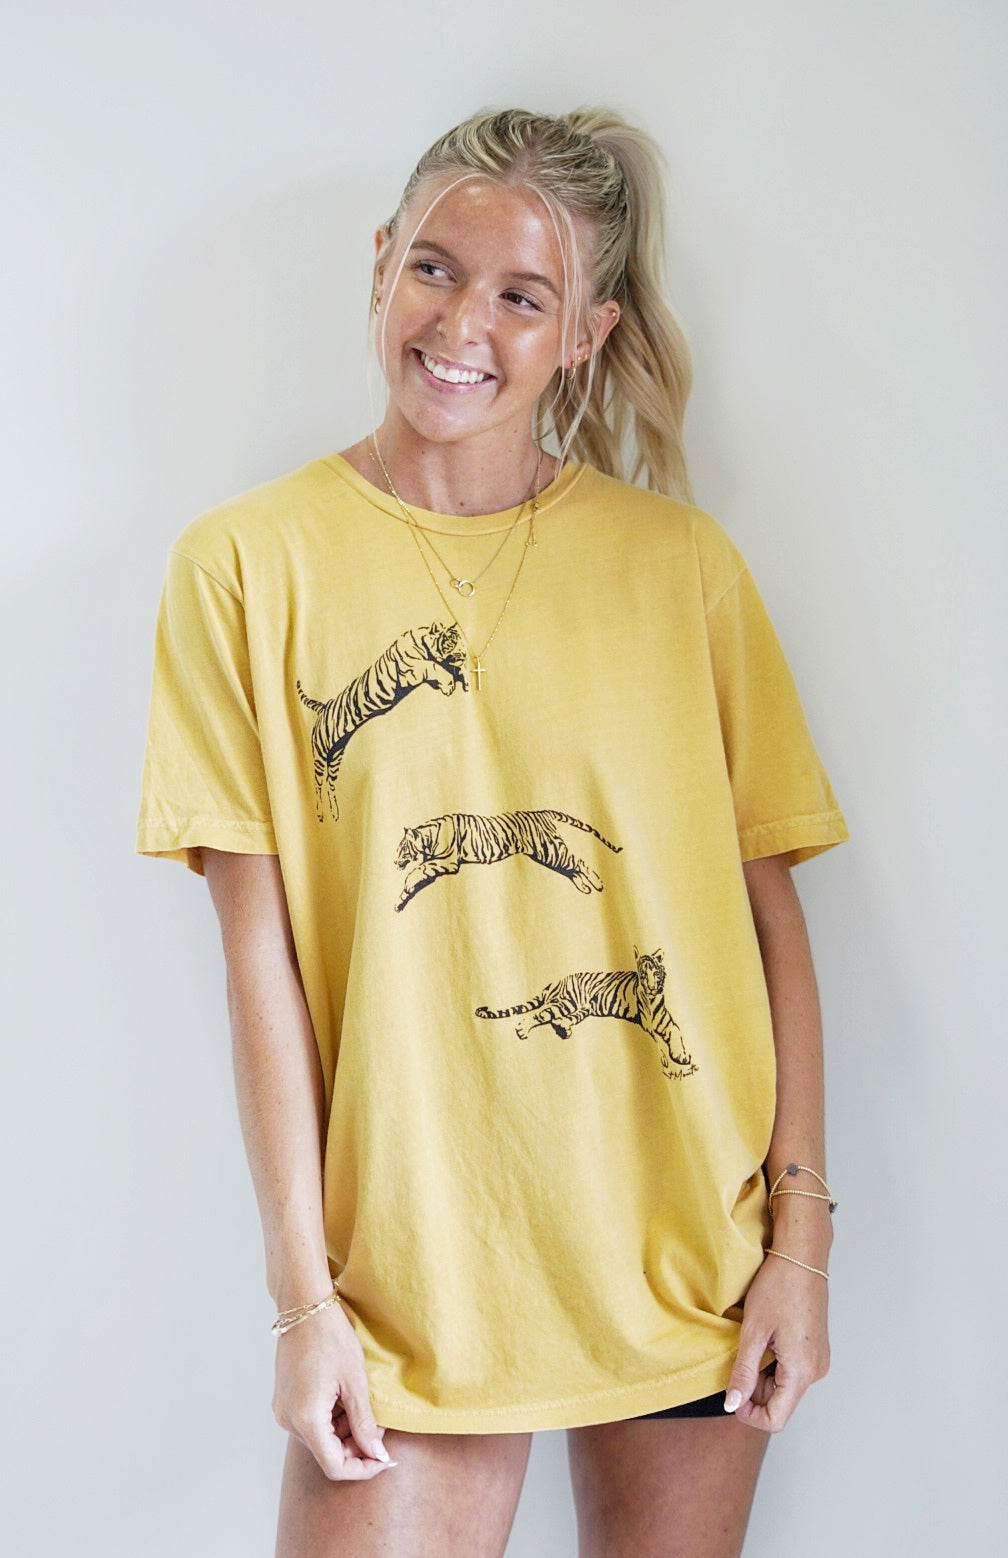 Julie Jumping Tiger Graphic Tee Crew Neckline Short Sleeve Jumping Tiger Feature  Color/Mustard True to size fit 100% Cotton Machine wash warm inside out with like colors. Model is wearing size: medium